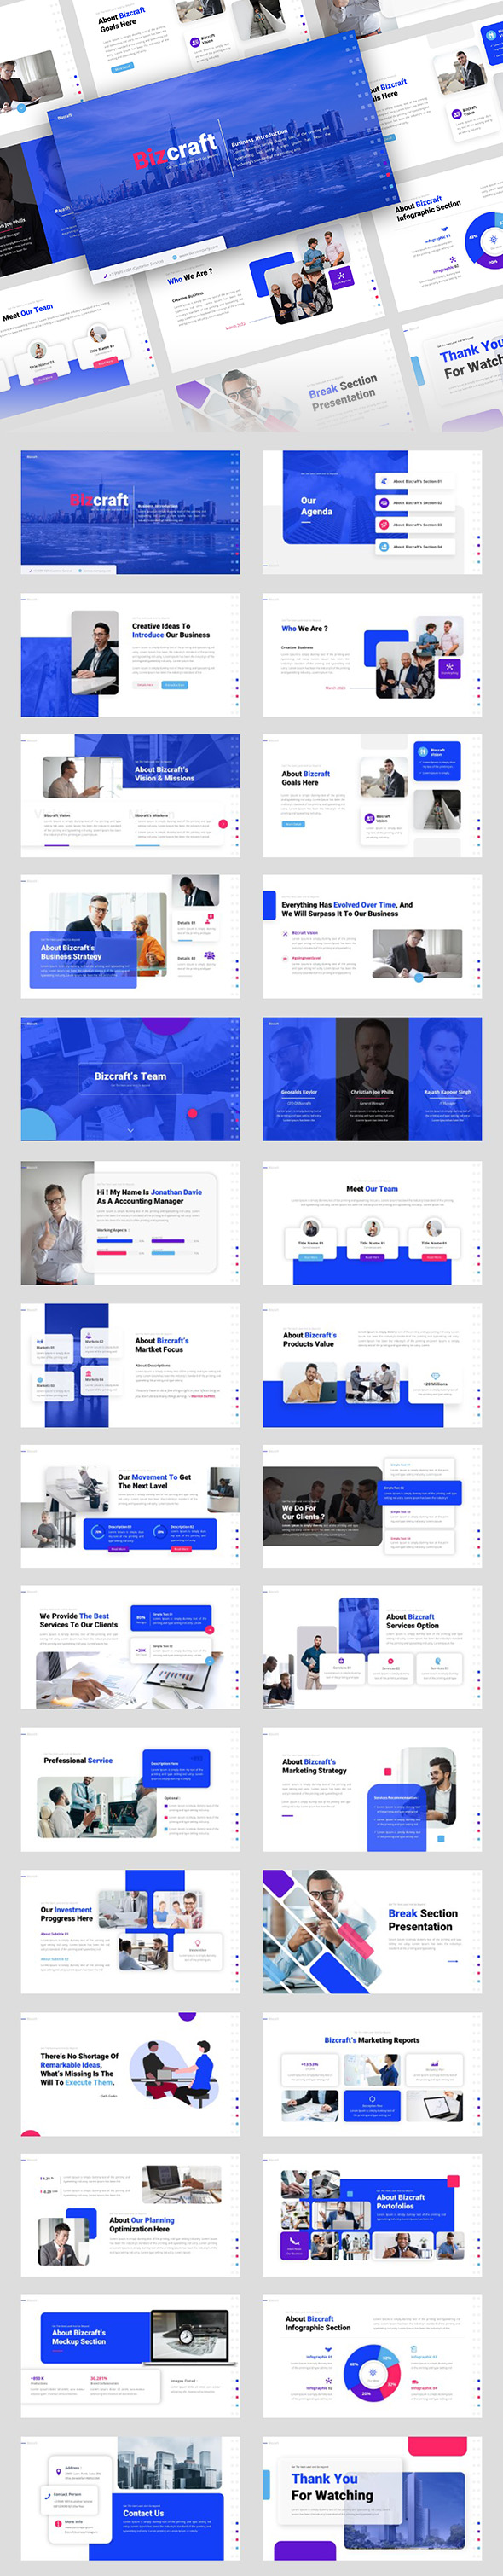 [DOWNLOAD]Bizcraft – Business Introduction Powerpoint Template